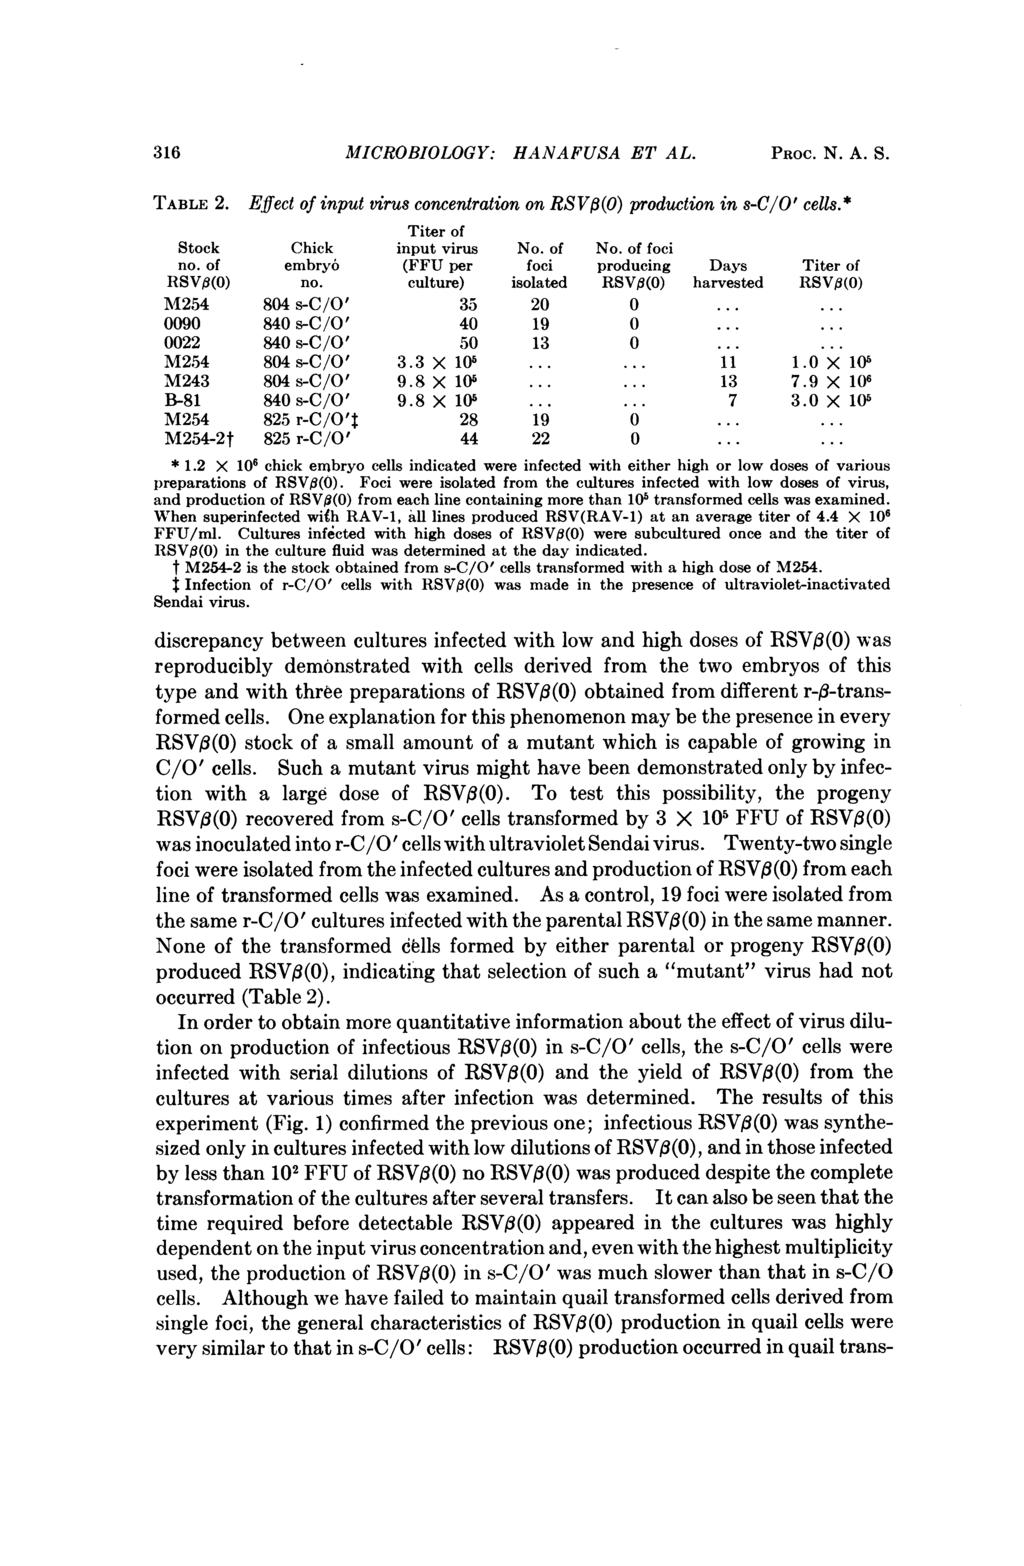 316 MICROBIOLOGY: HANAFUSA ET AL. PROC. N. A. S. TABLE 2. Efect of input virus concentration on RSV,3(O) production in s-c/o' cells.* Titer of Stock Chick input virus No. of No. of foci no.